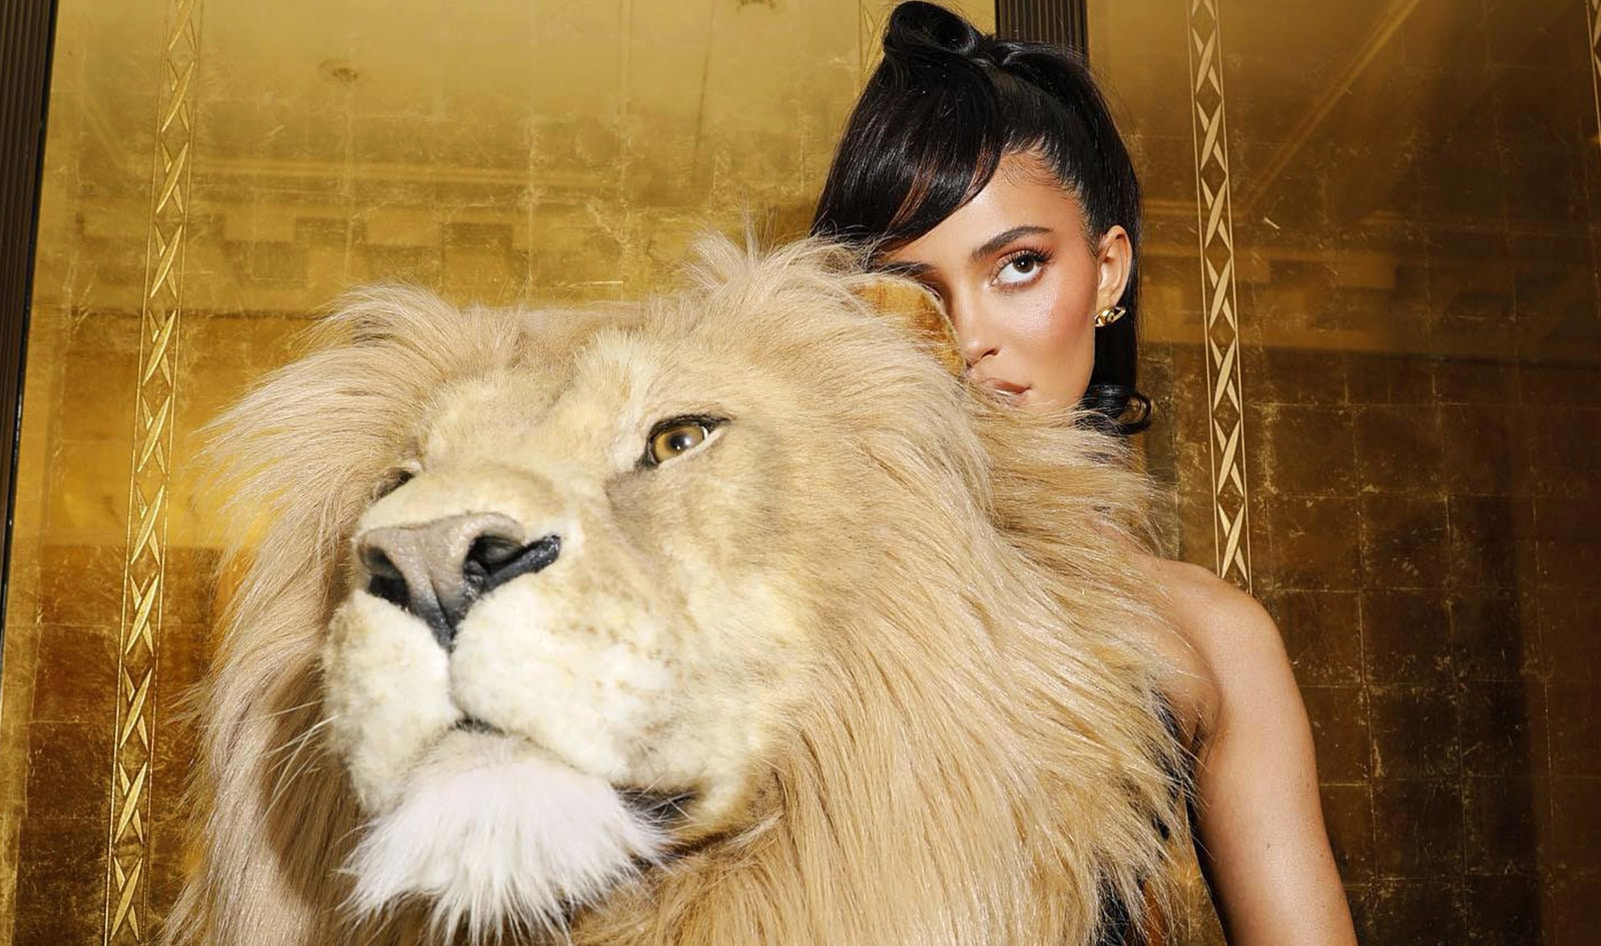 Kylie Jenner Thinks Wearing a Lion’s Head Is "Beautiful." Her Fans Disagree.